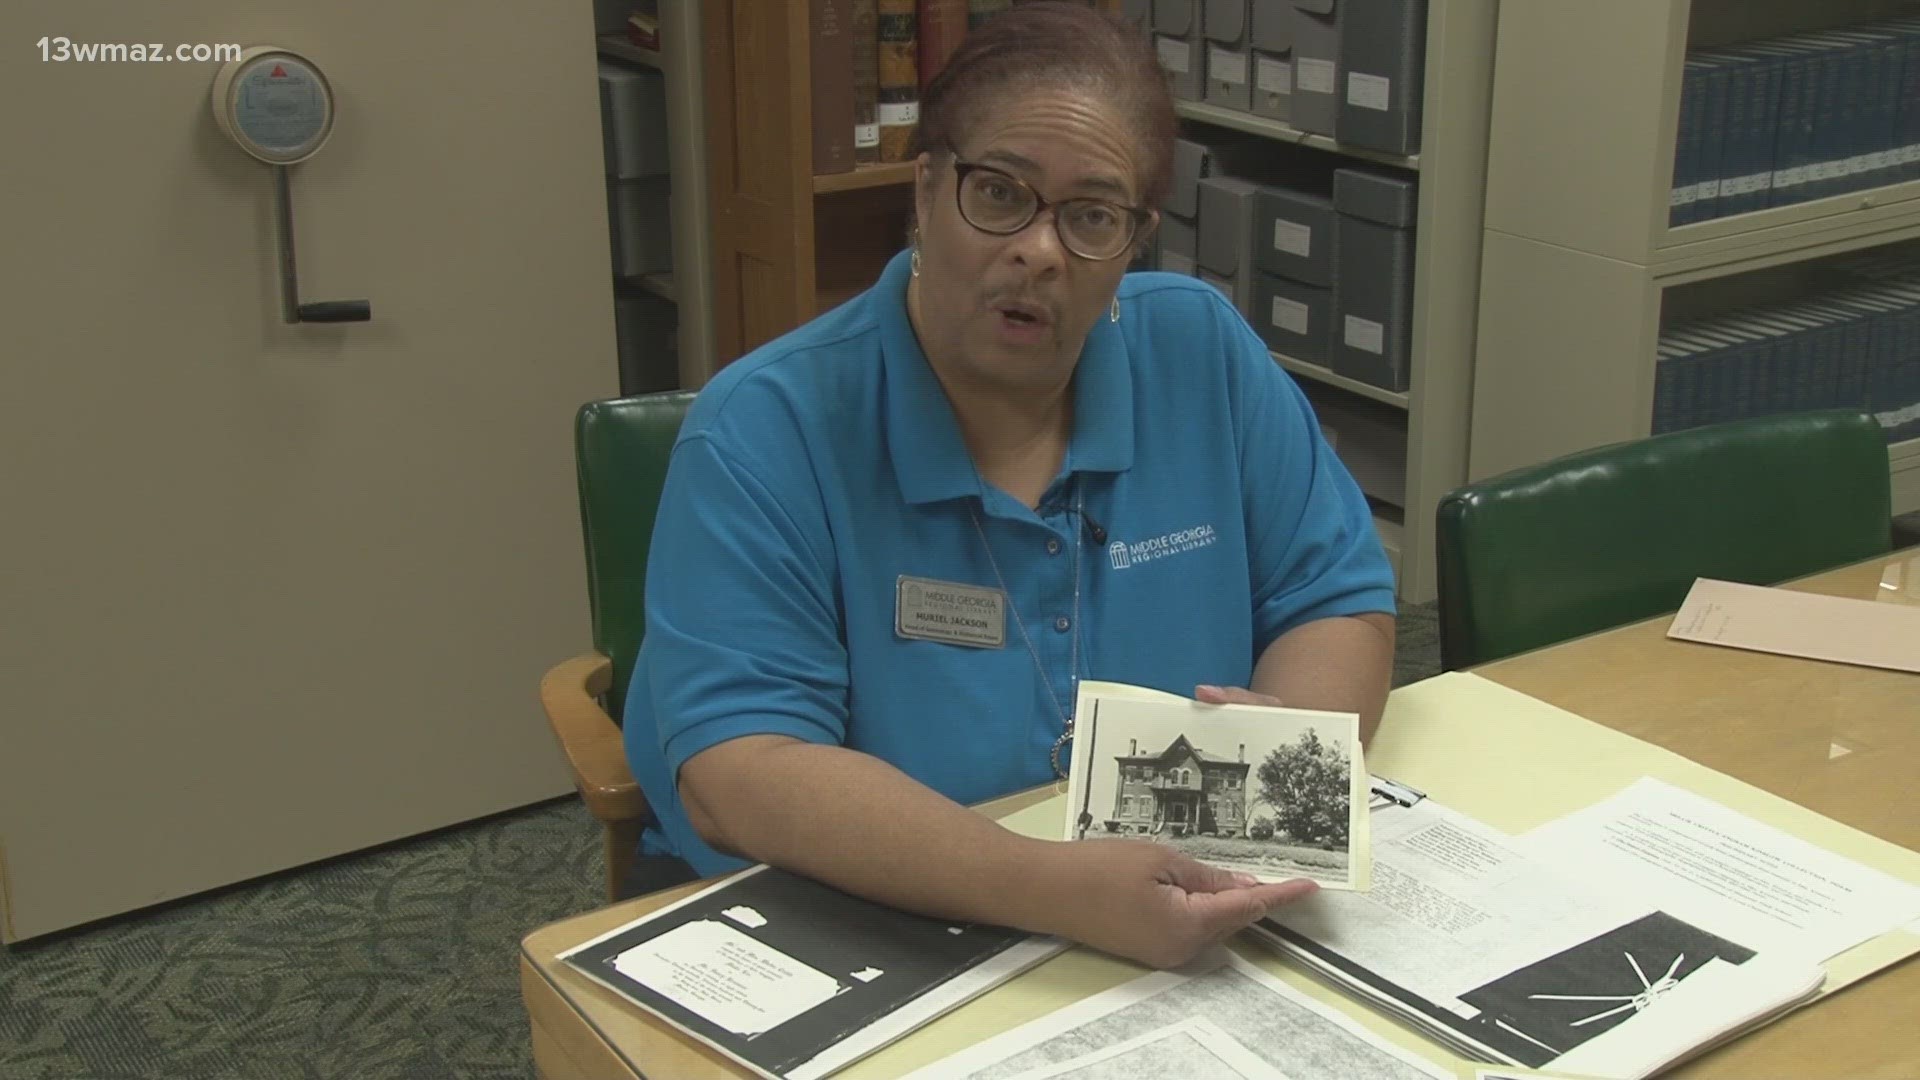 Washington Memorial Library is calling on people to help preserve and grow knowledge of Macon's Black history.